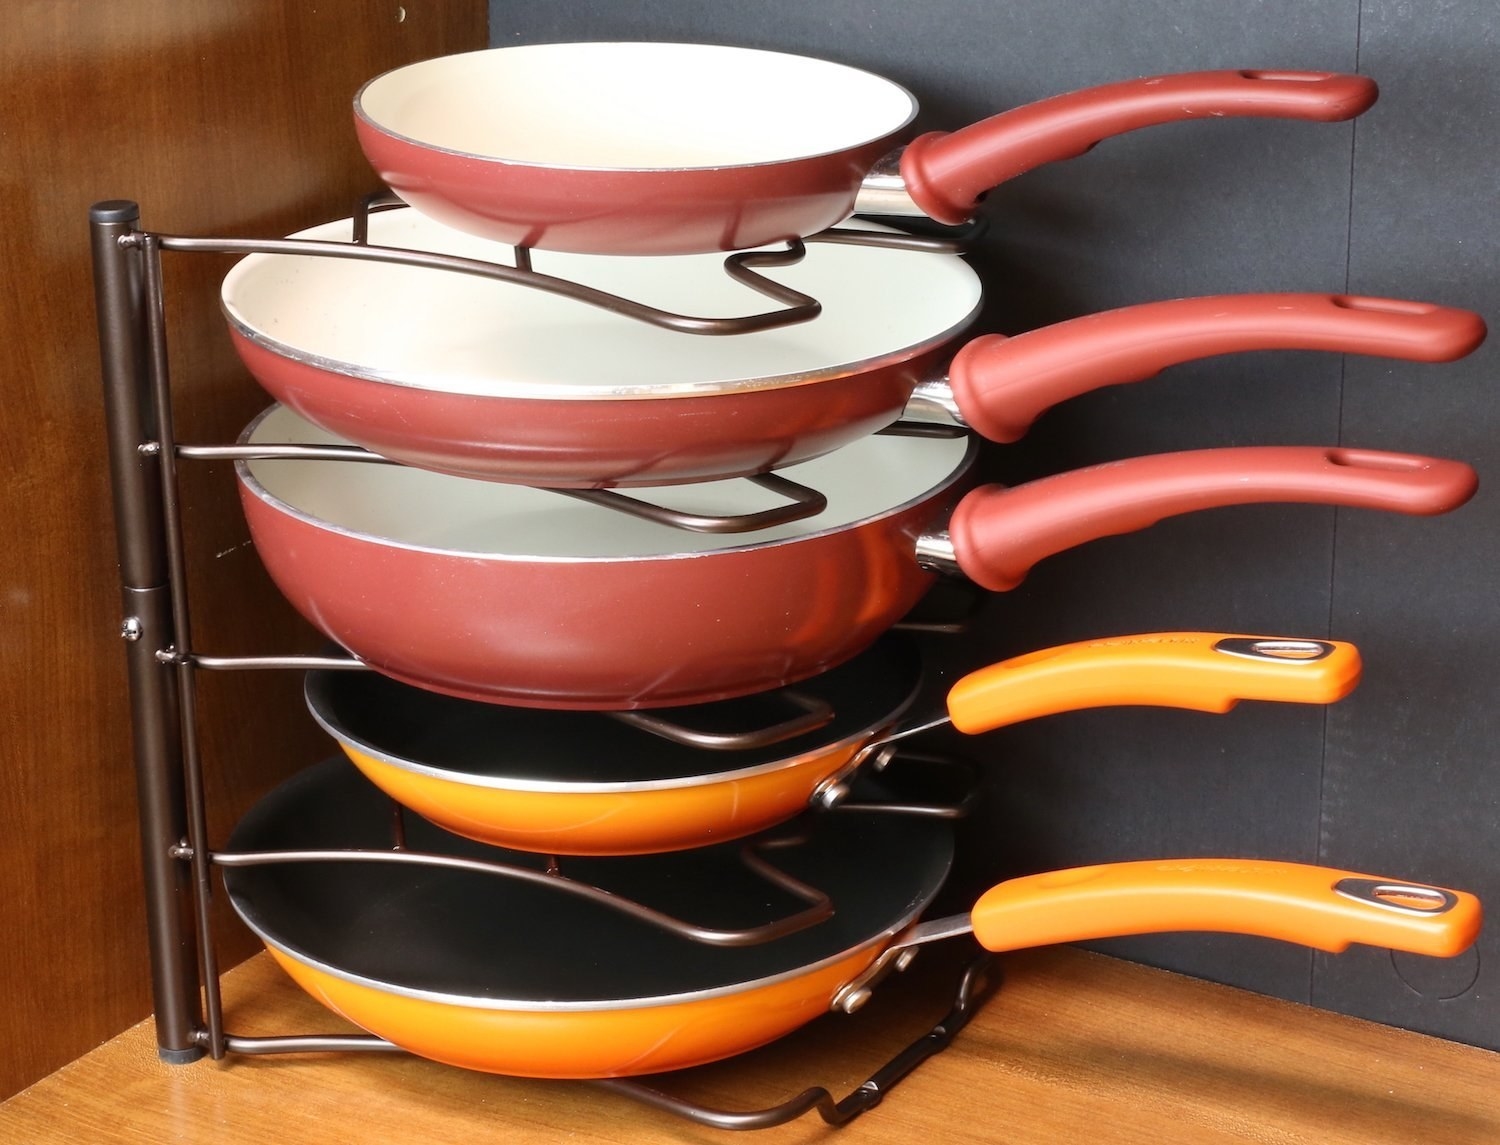 Pans stacked on stainless steel storage system